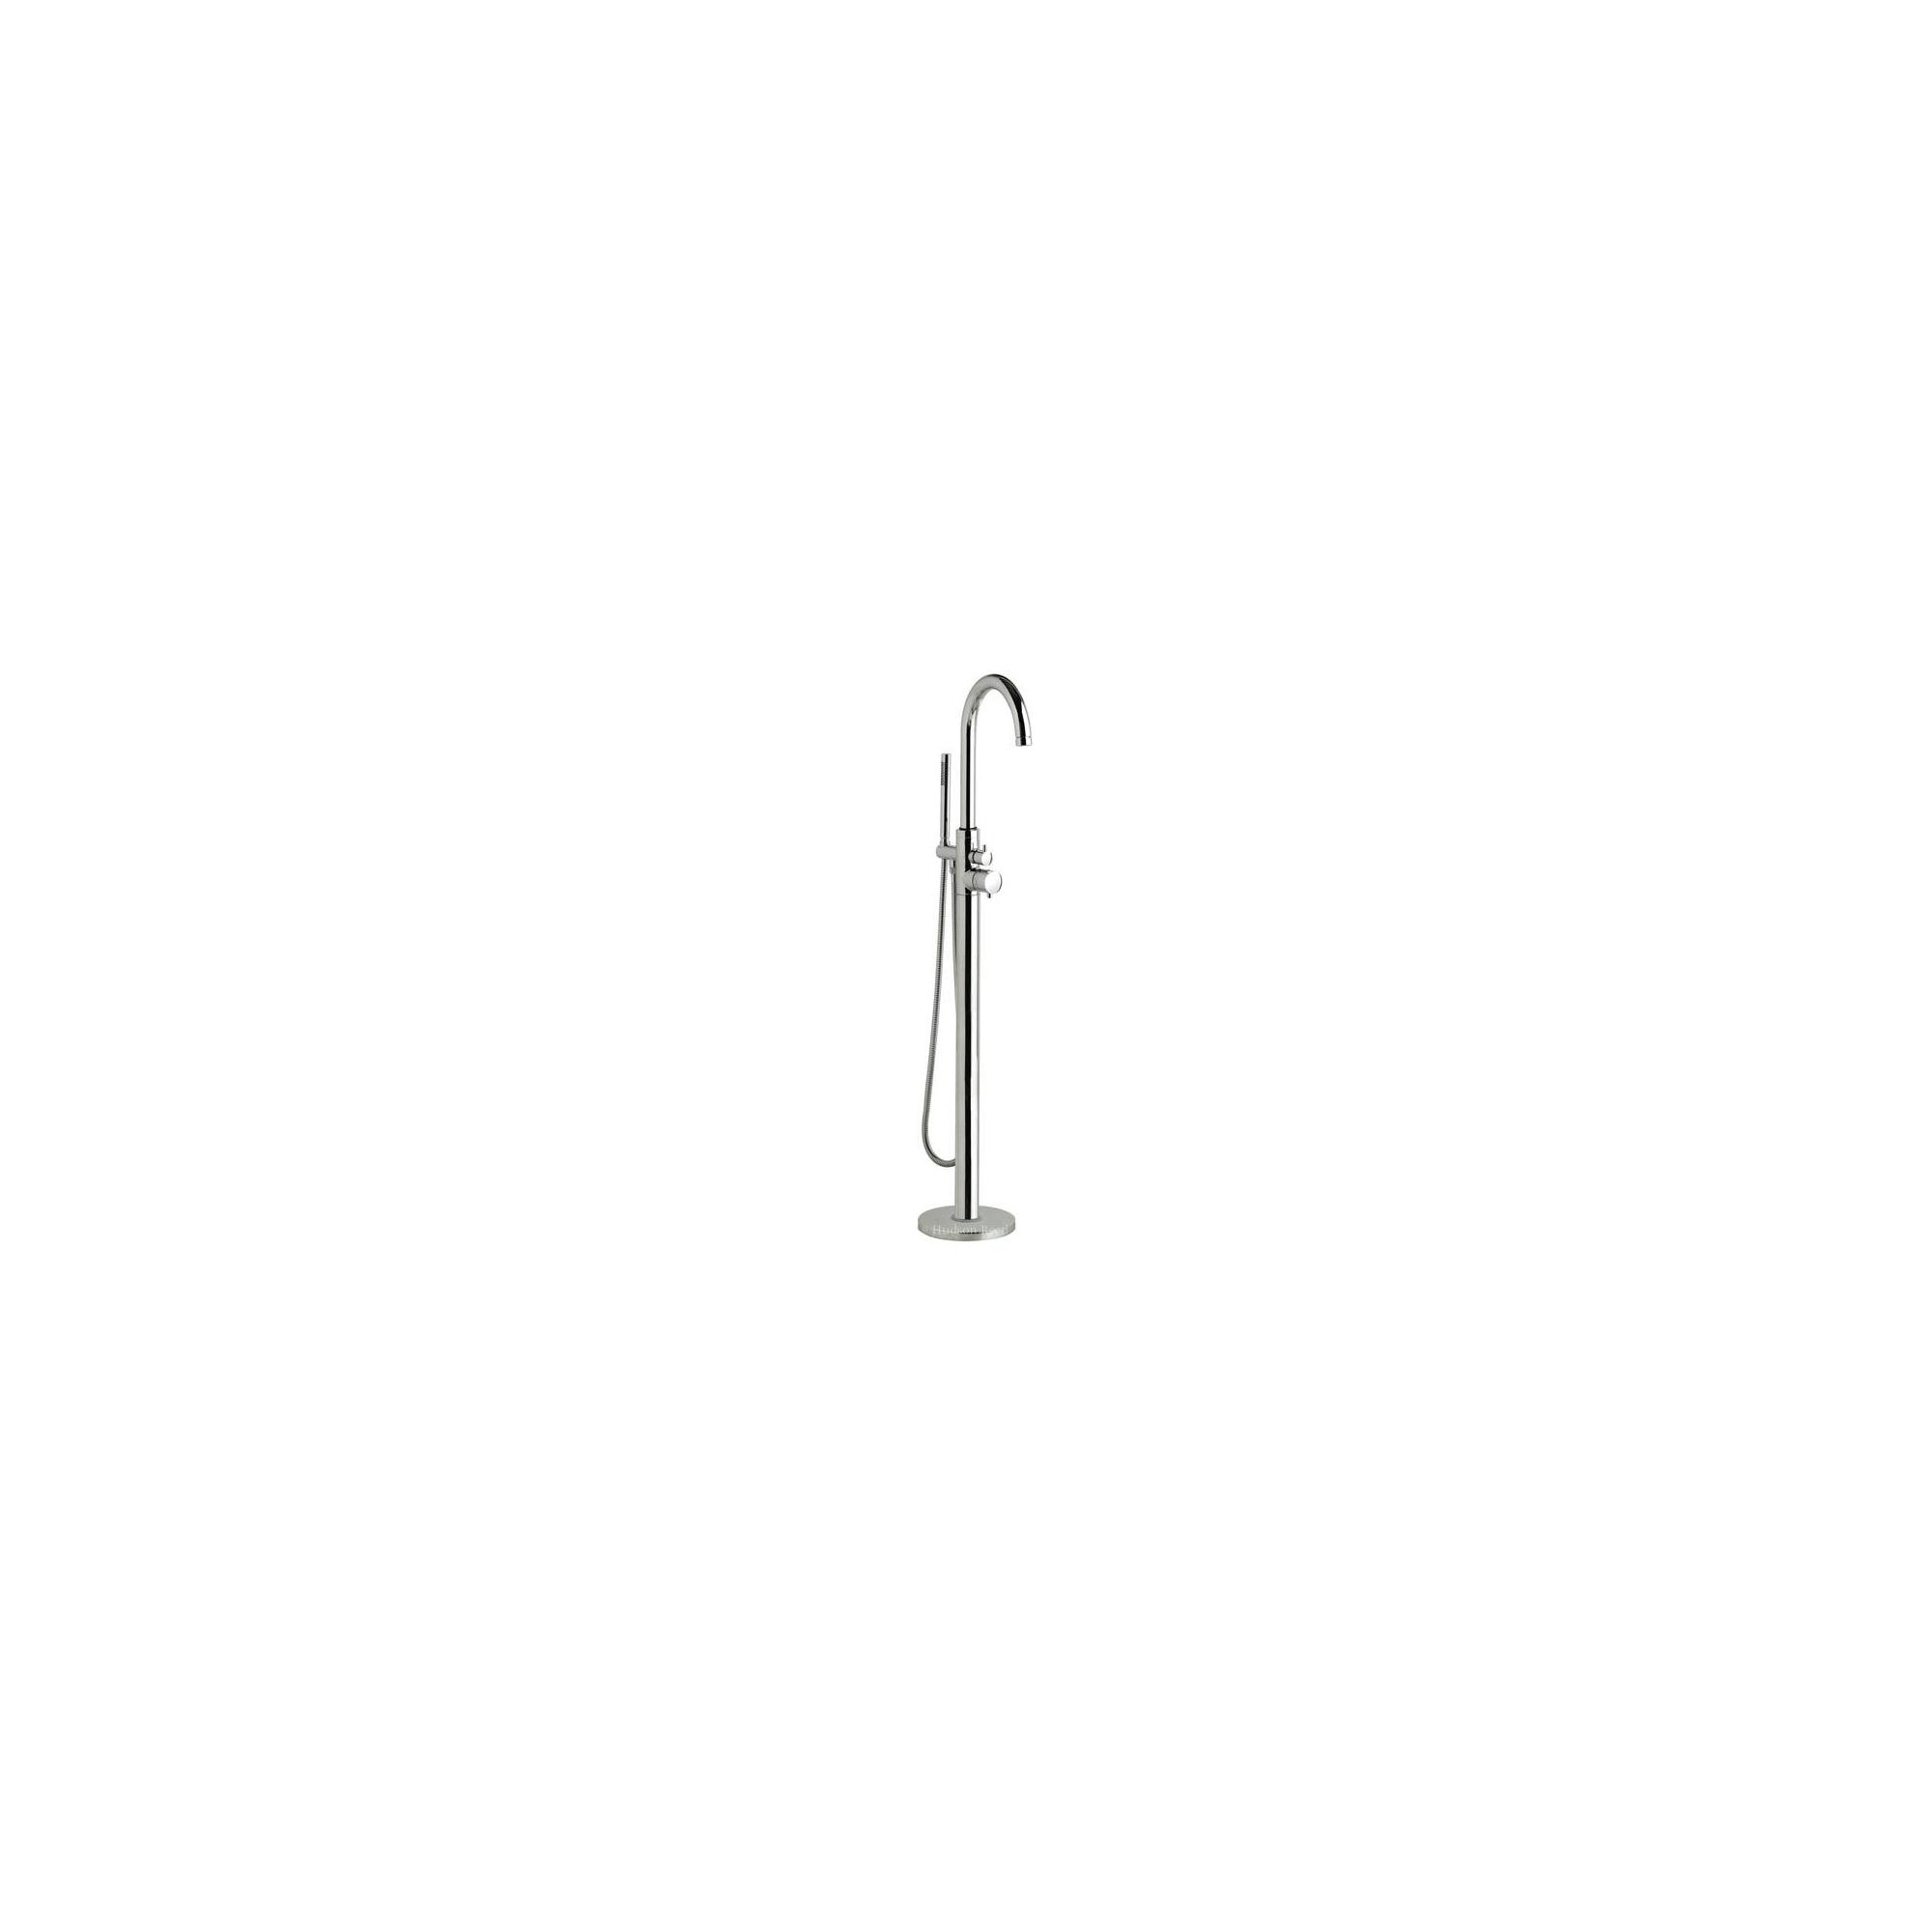 Hudson Reed Tec Single Lever Thermostatic Single Lever Mono Bath Shower Mixer Tap at Tesco Direct